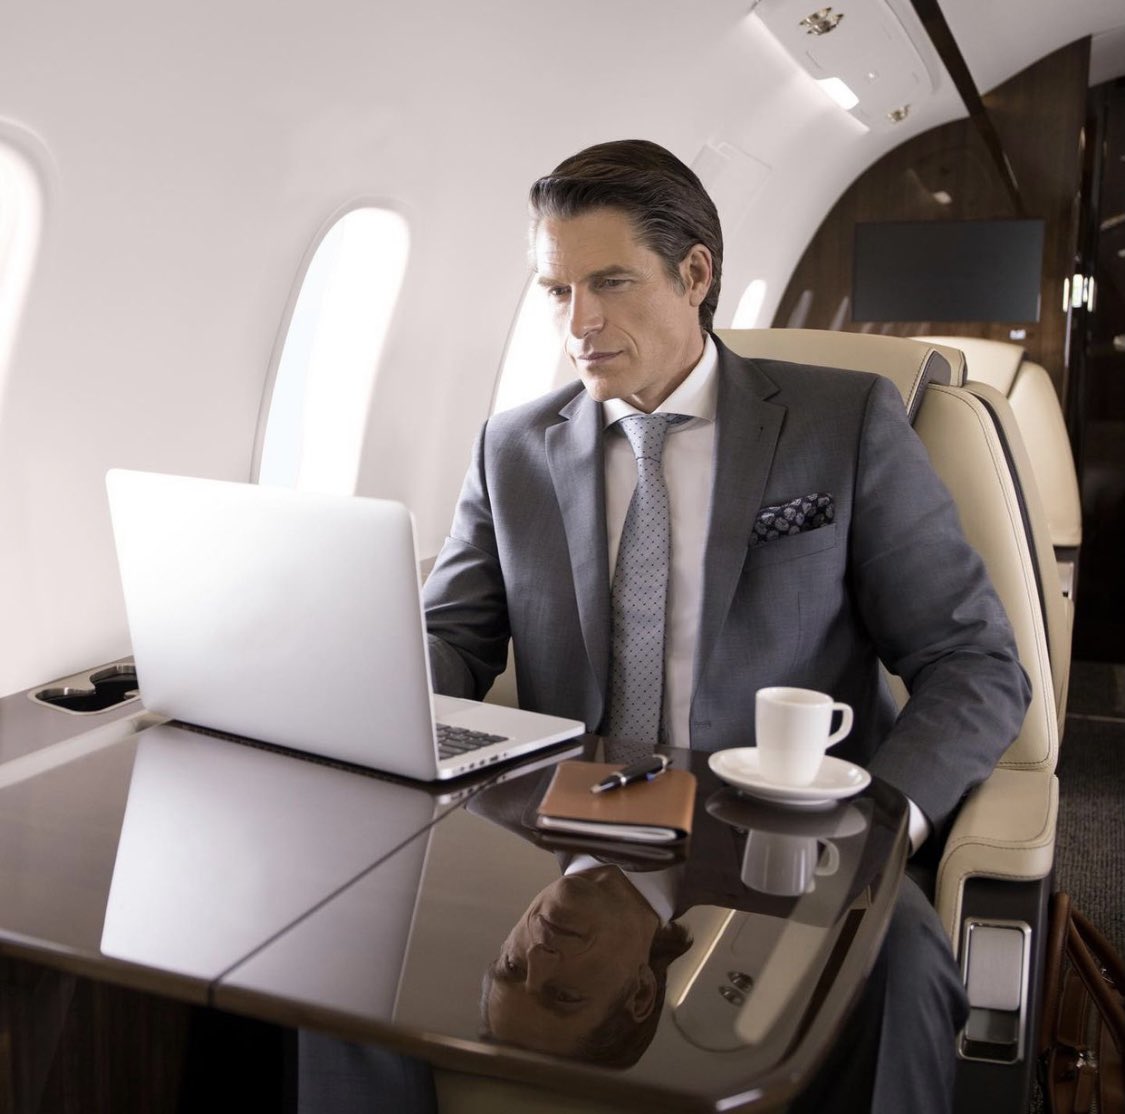 #SPECAviationSM
By offering a wide range of services such as satellite phone and internet access during your flight you don’t have to worry about your business anymore. It will be always within reach! 
•
•
•
#businessman #businessaviation #challenger #bombardier #CL650 #safety 